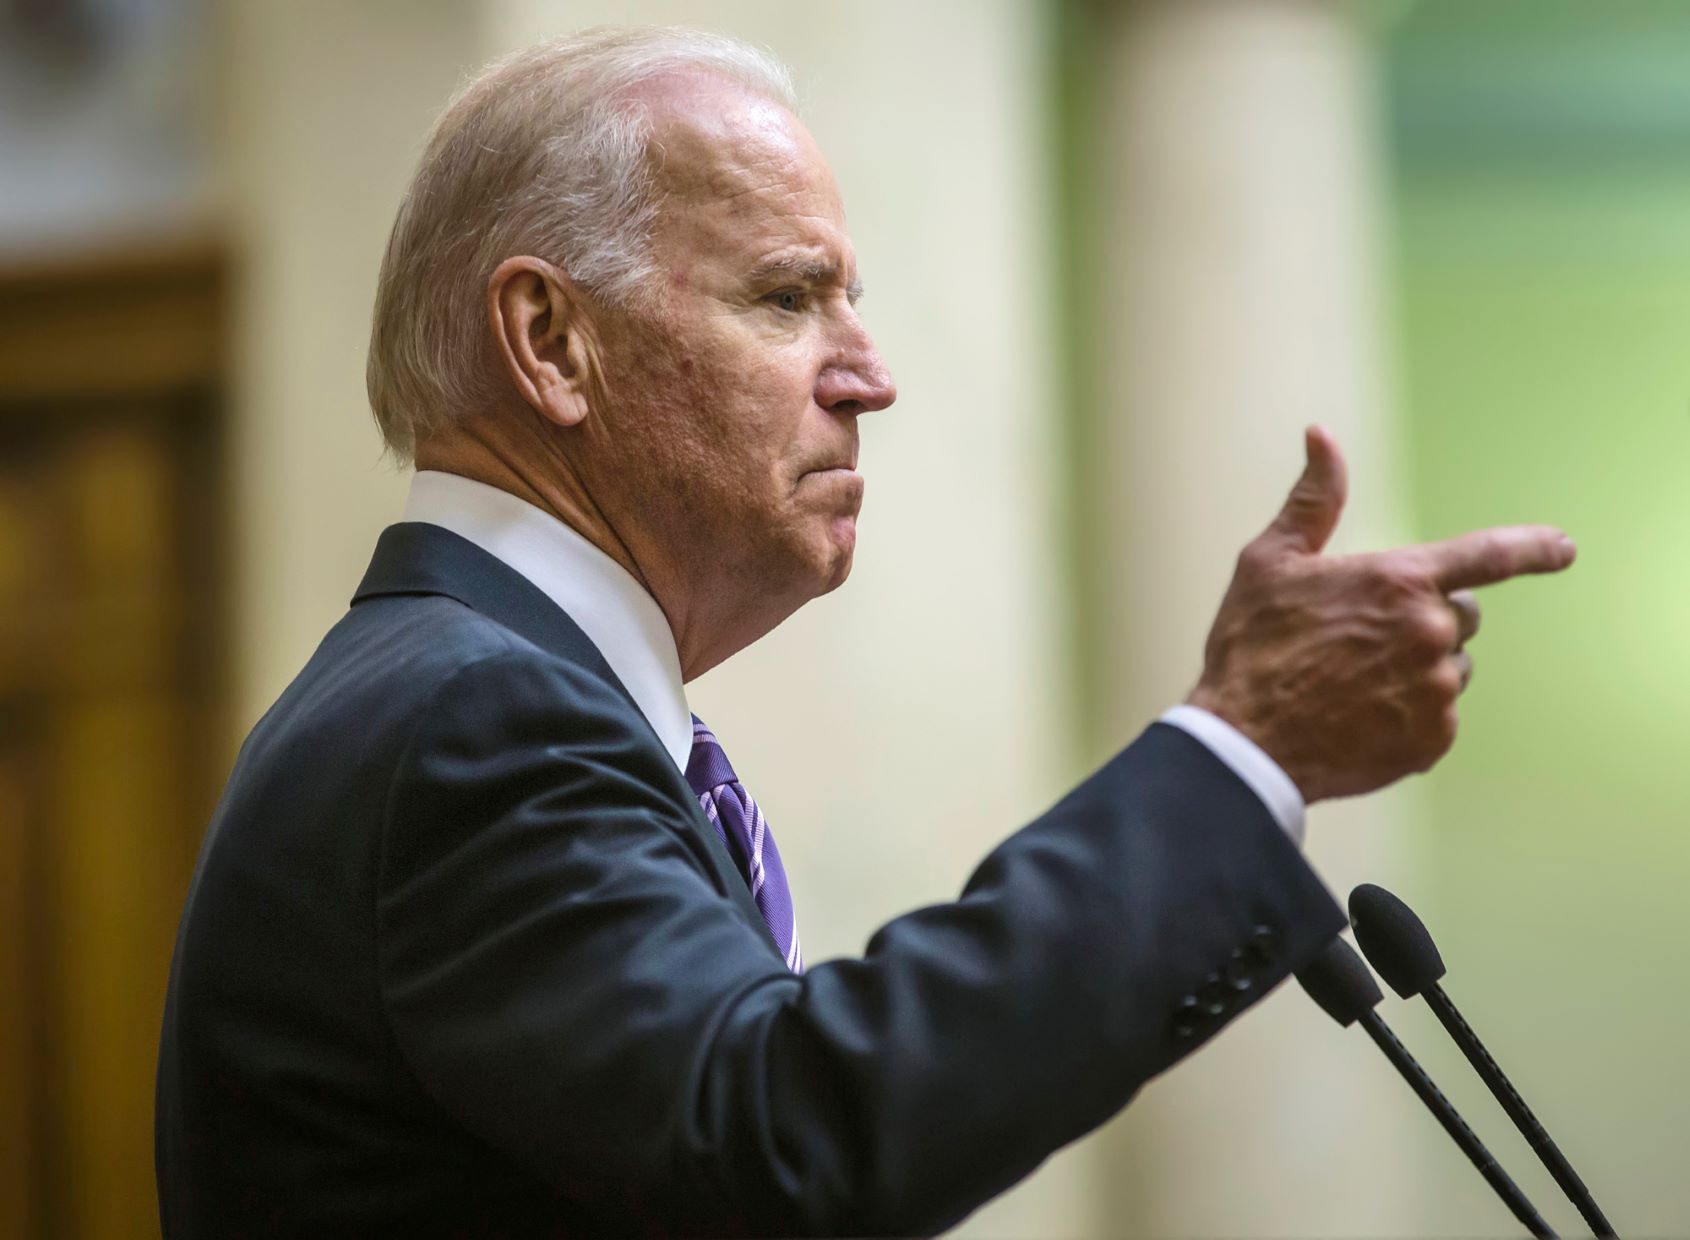 charge-biden-with-treason-call-spreads-with-trump’s-trial-as-backdrop